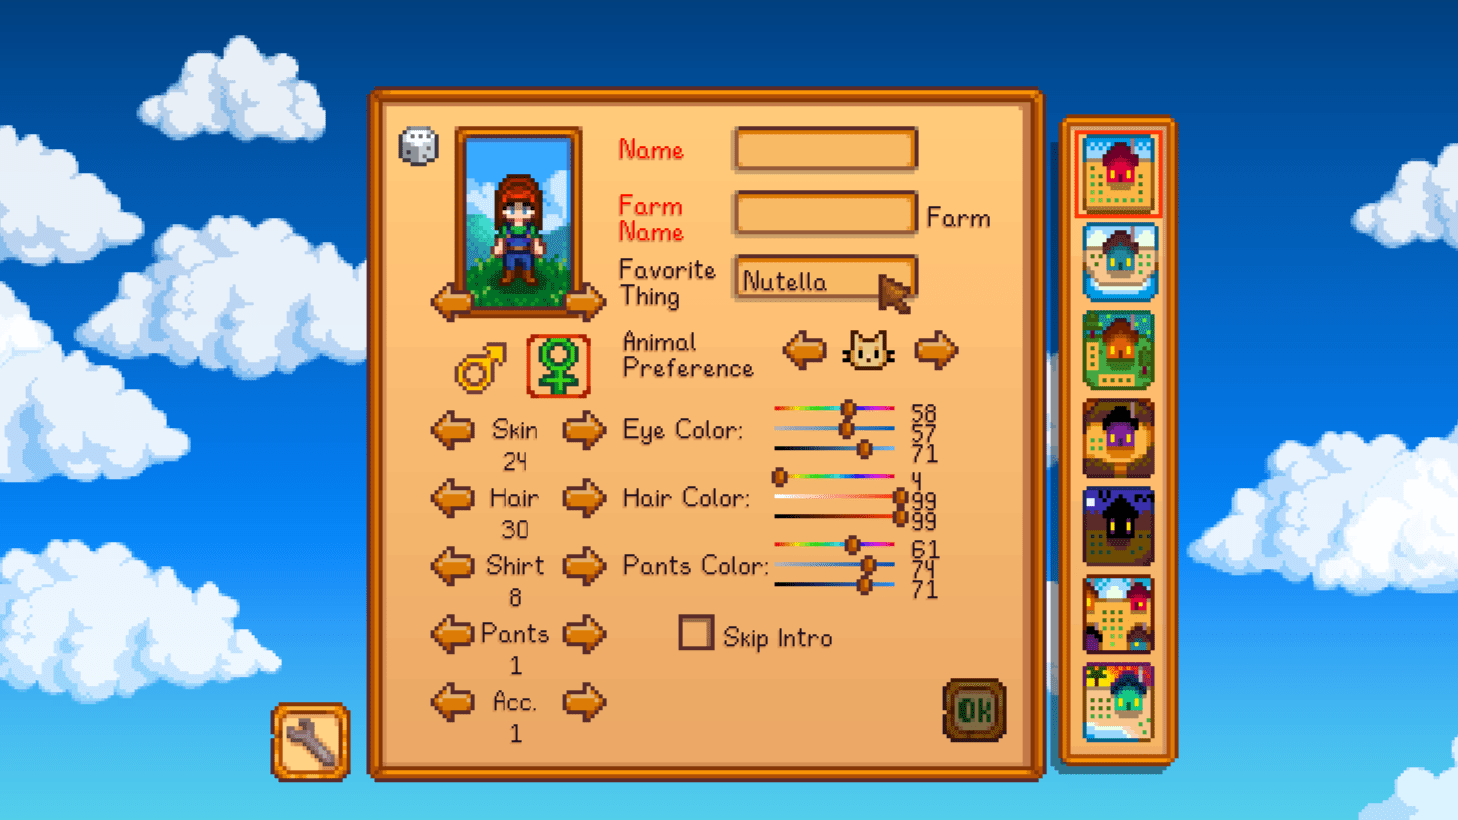 Stardew Valley Character Creation Menu, favorite thing as Nutella